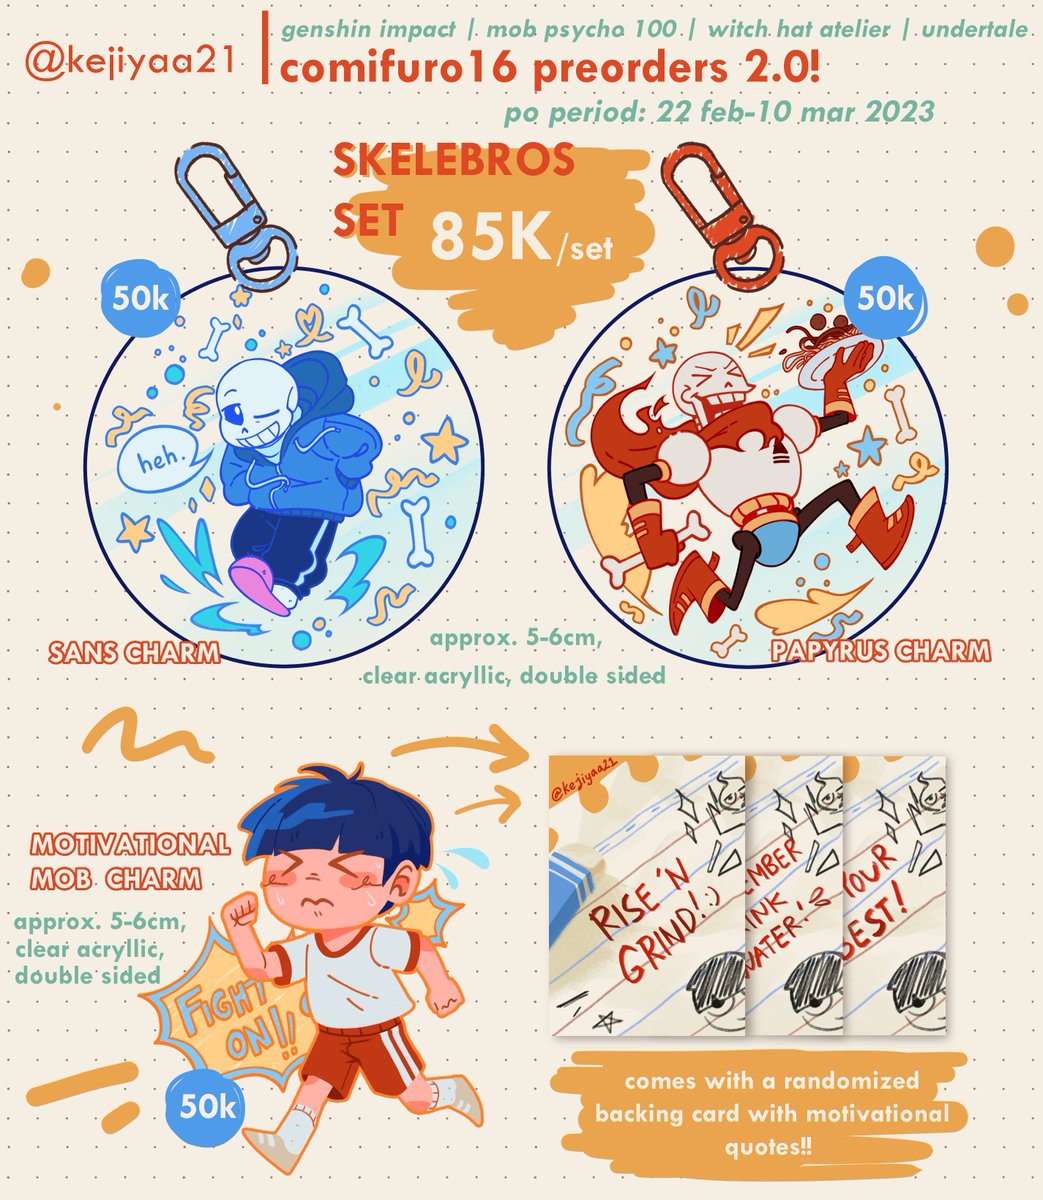 (2/2)

🧡Order Form: Available at https://t.co/tuKCXemDQ2

#comifuro16 #cf16 #artidn #genshinimpact #mobpsycho100 #witchhatatelier #undertale 